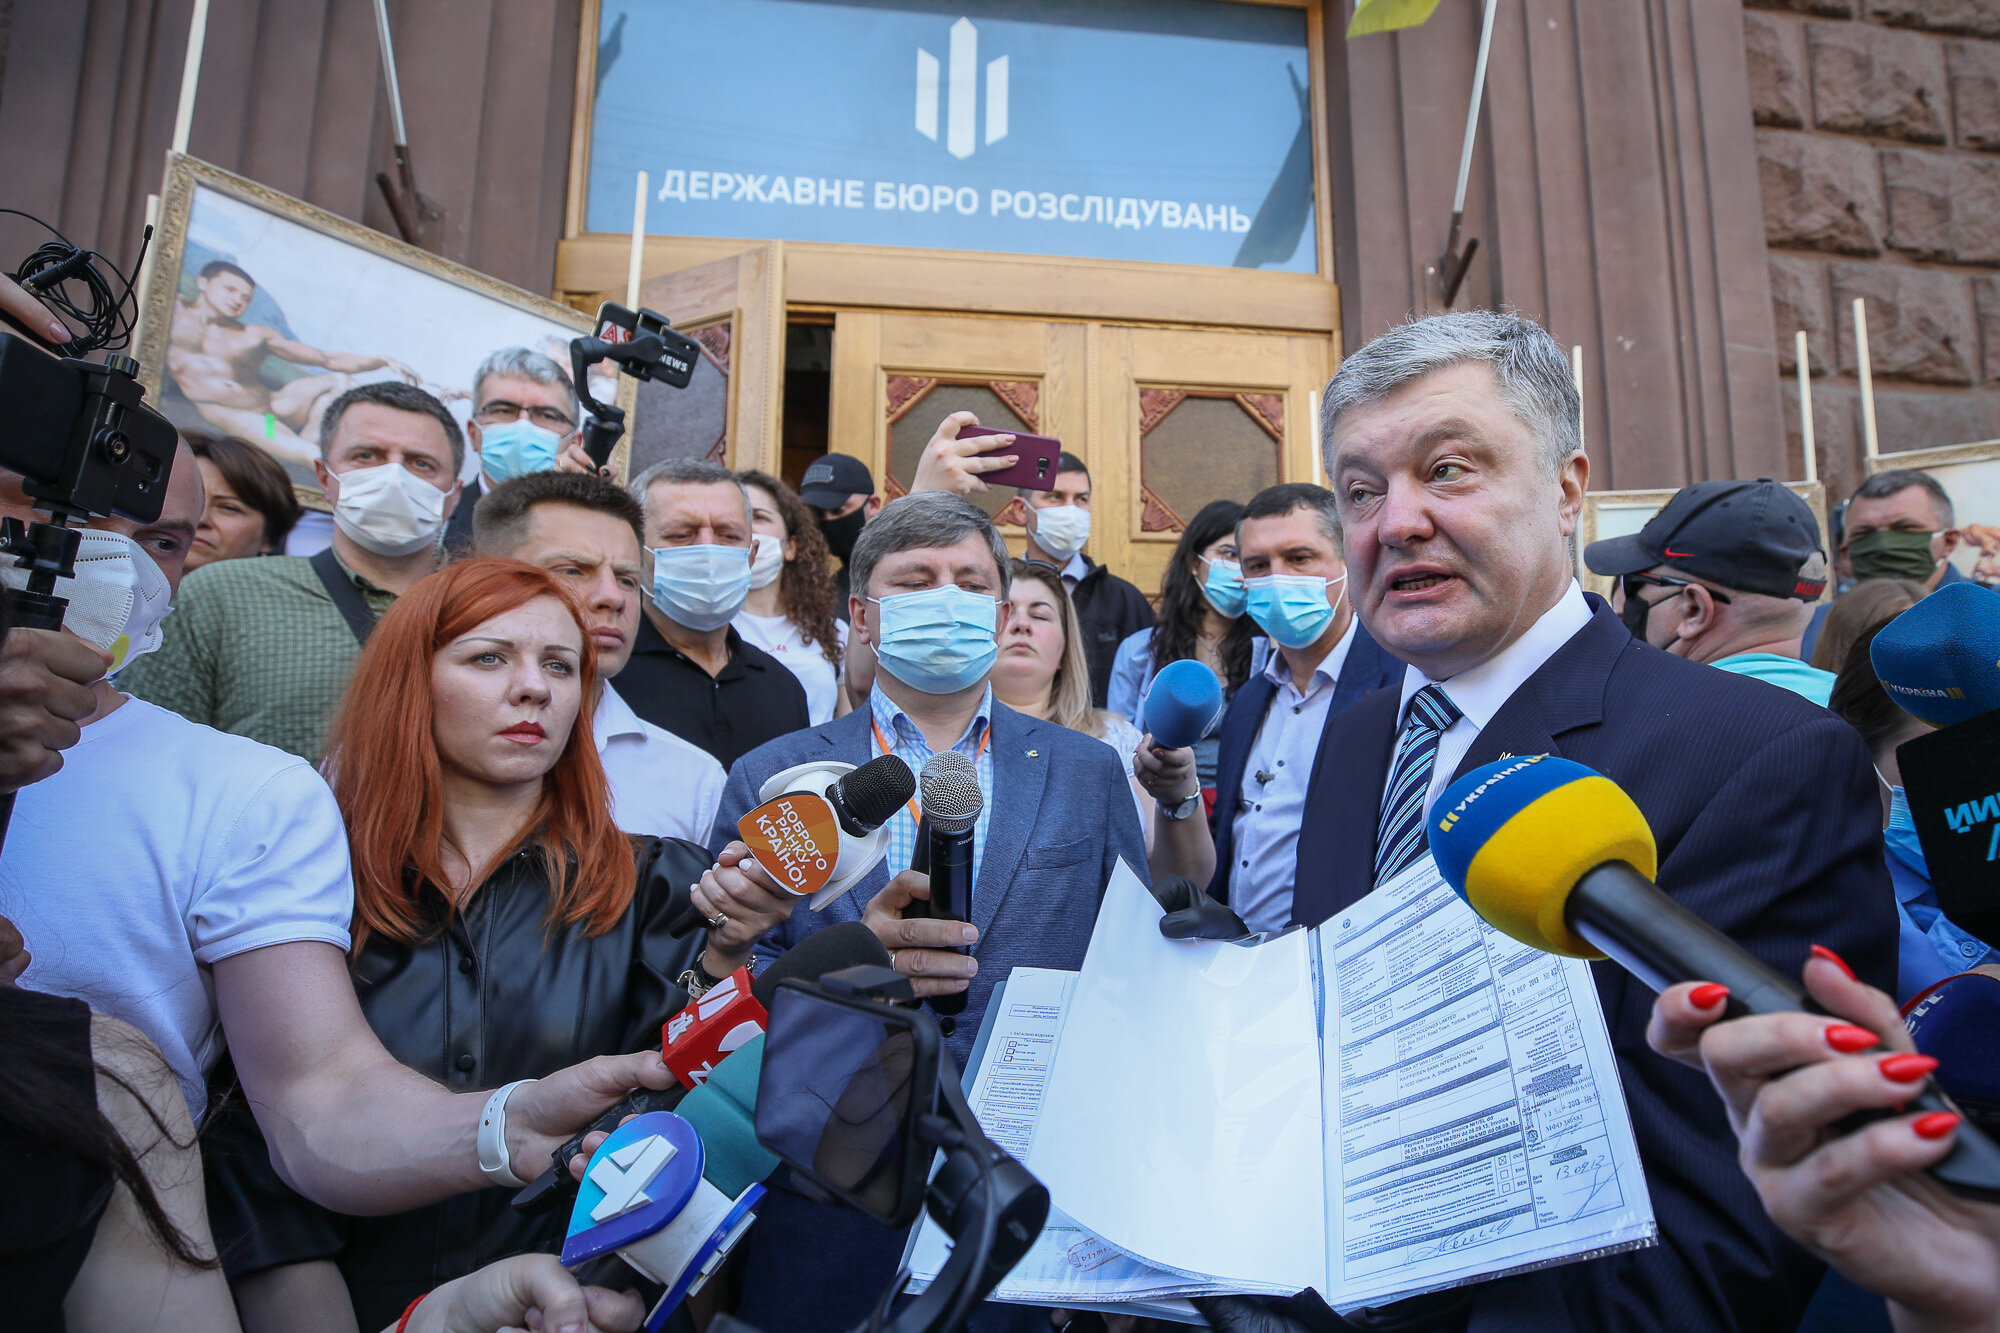 Petro Poroshenko speaks with journalists during a rally in his support in front of the State Investigation Bureau in downtown Kyiv on June 10, 2020.